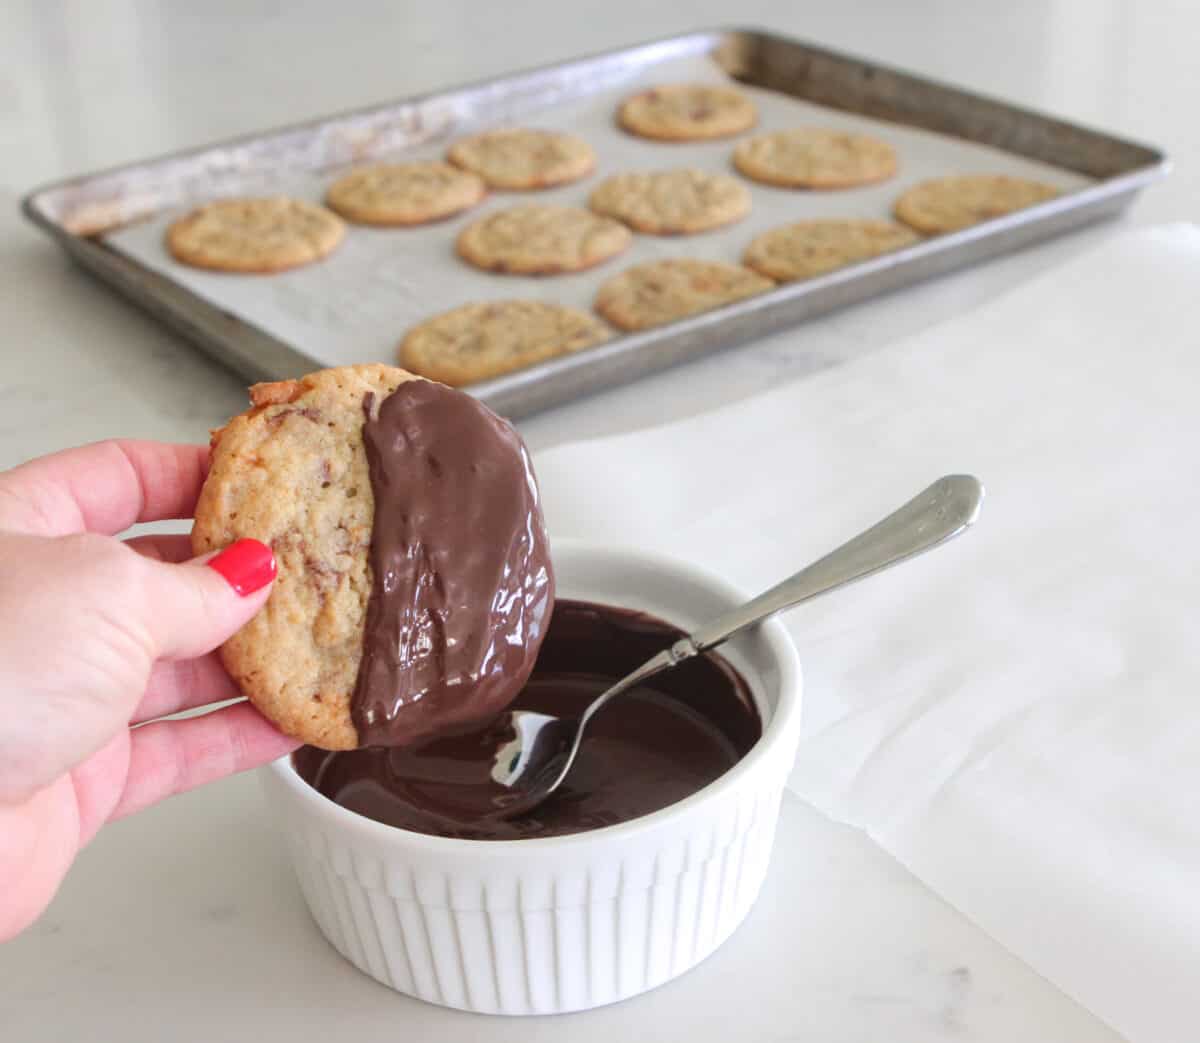 dipping cookies into chocolate